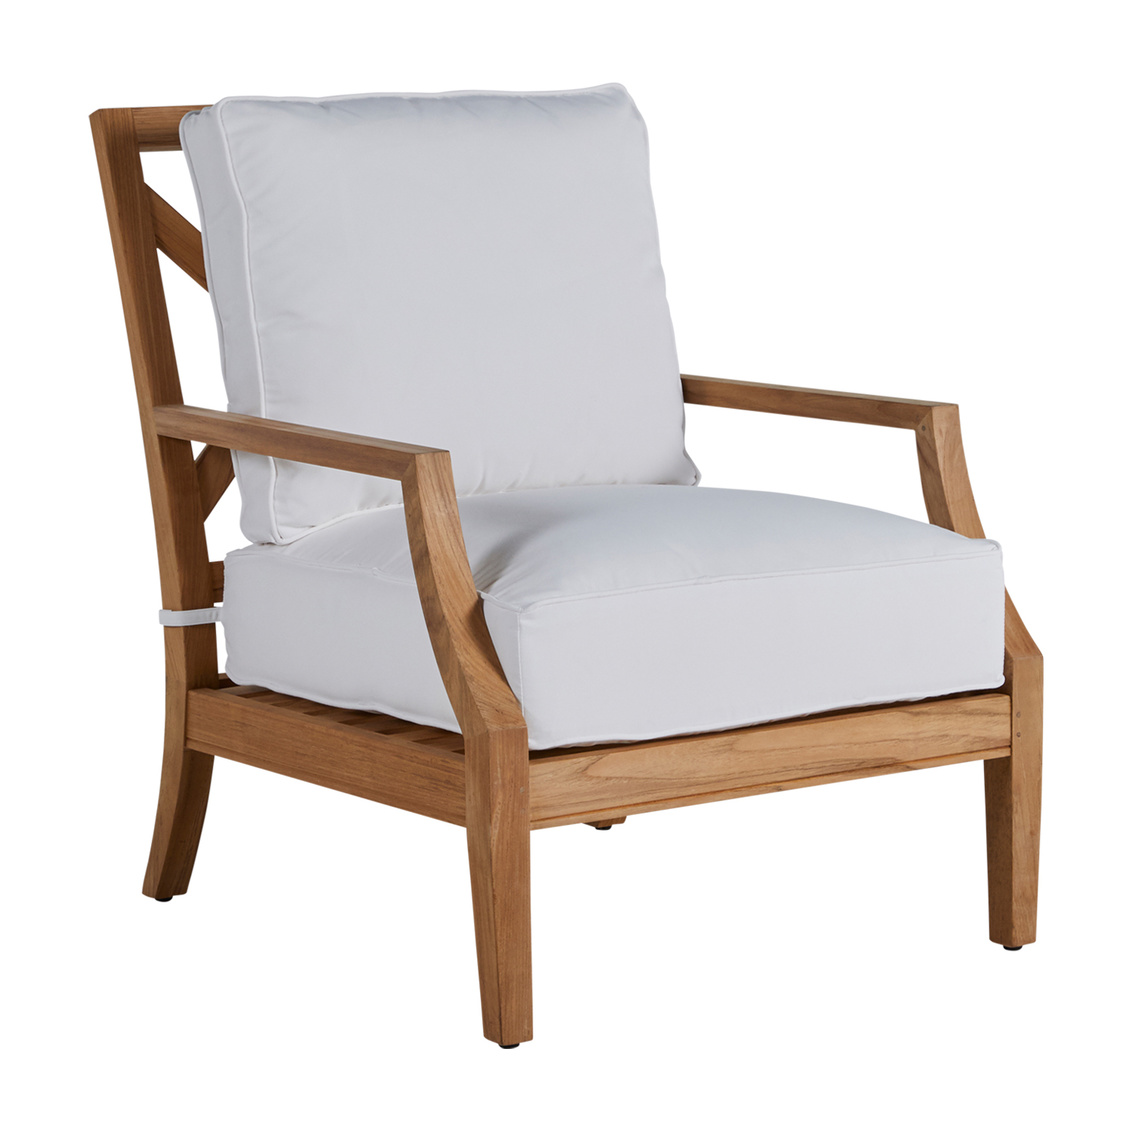 haley lounge chair in natural teak – frame only product image